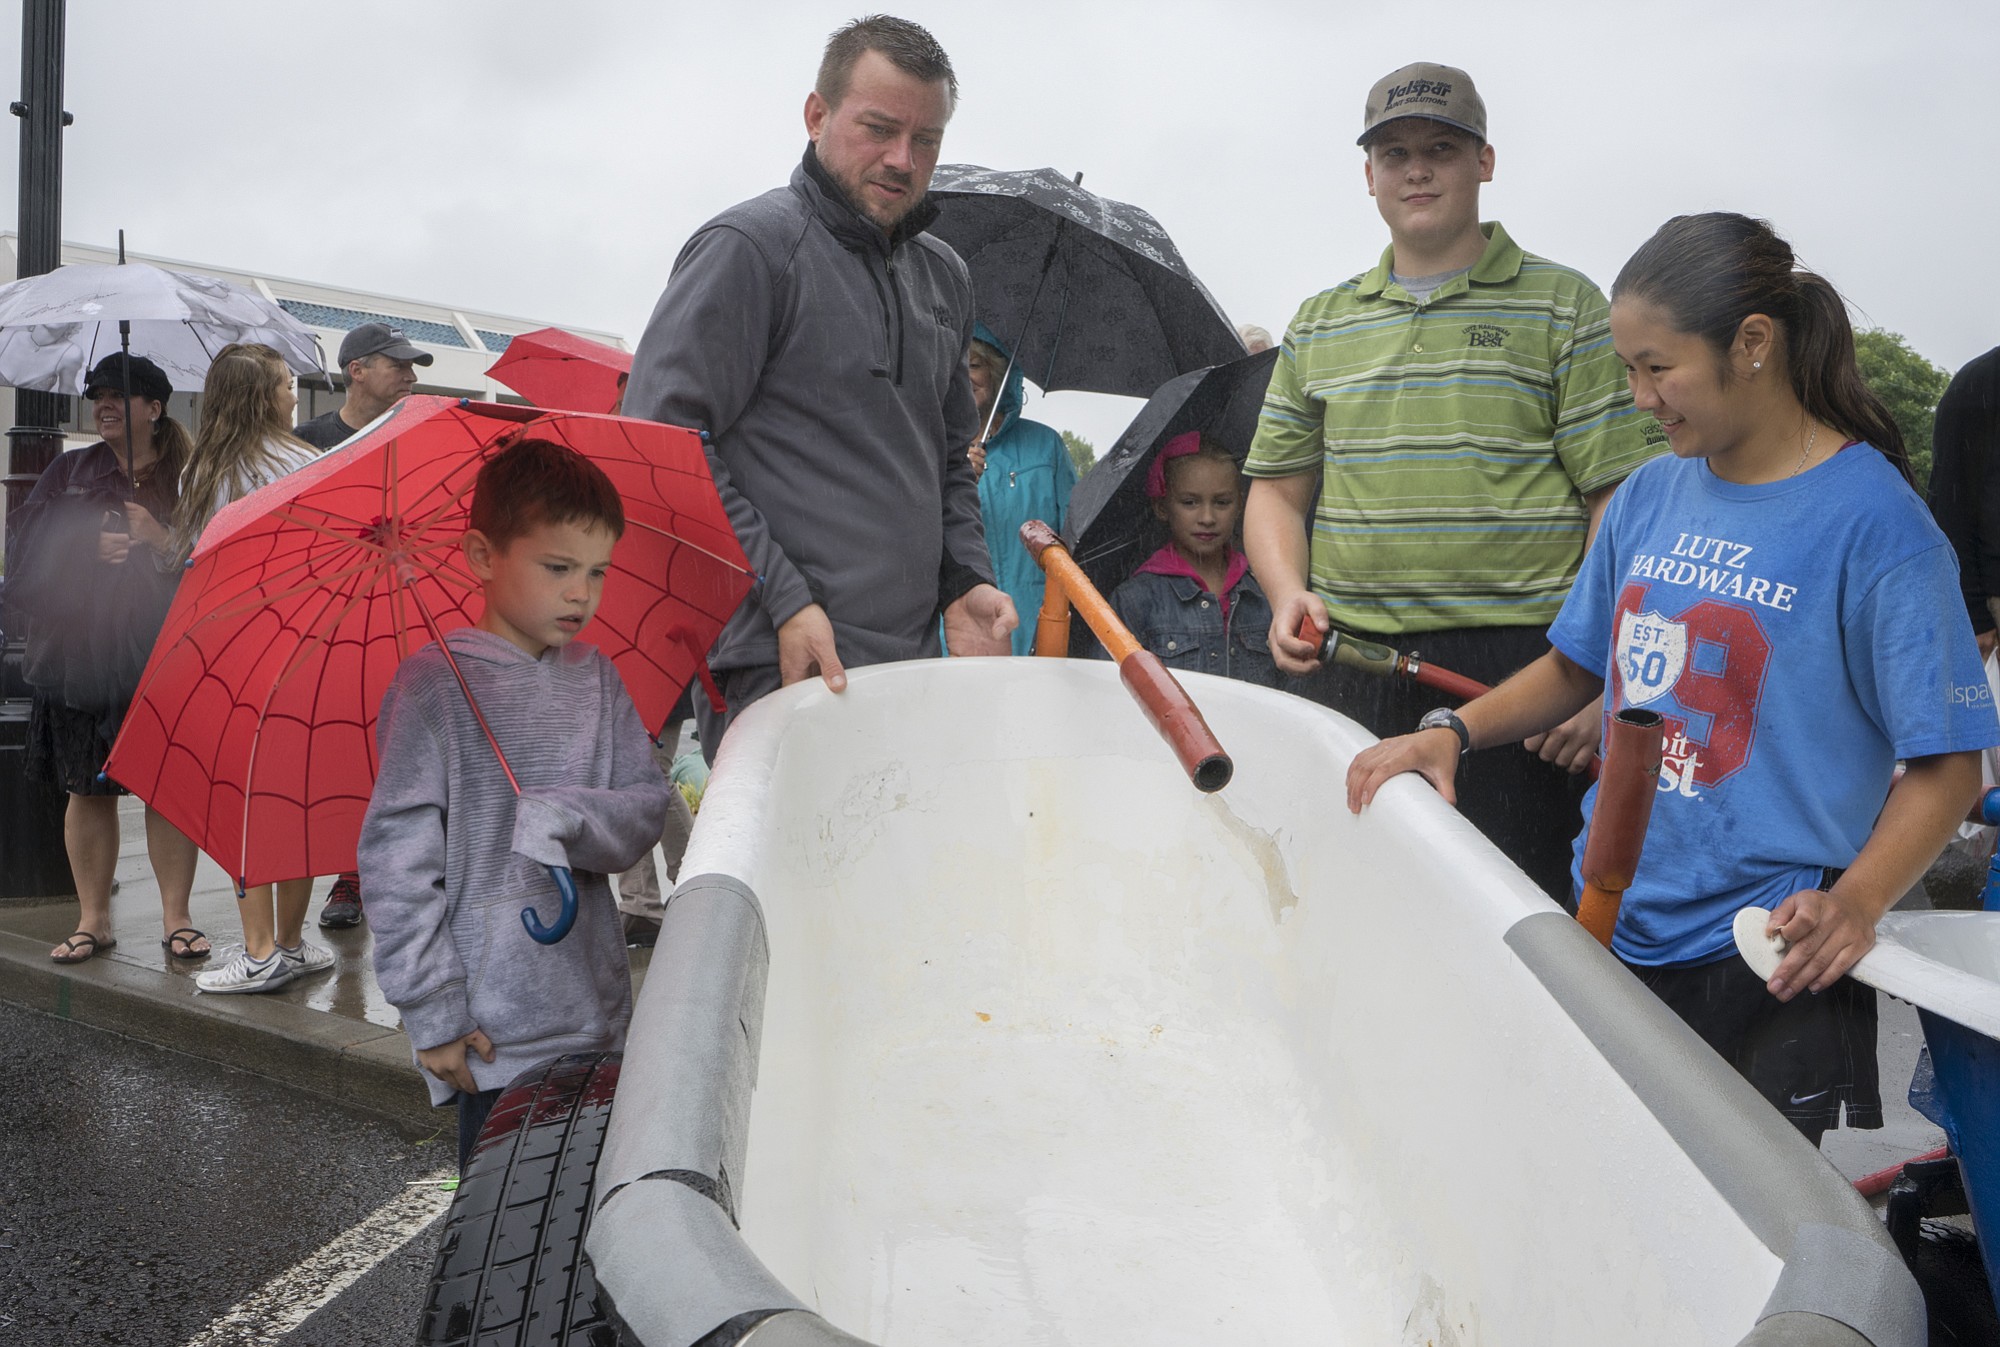 From right to left: Shauna Ahearn, Gaylor Rowland and Aaron Lutz prepare a bathtub before the annual Camas Days race on Saturday.